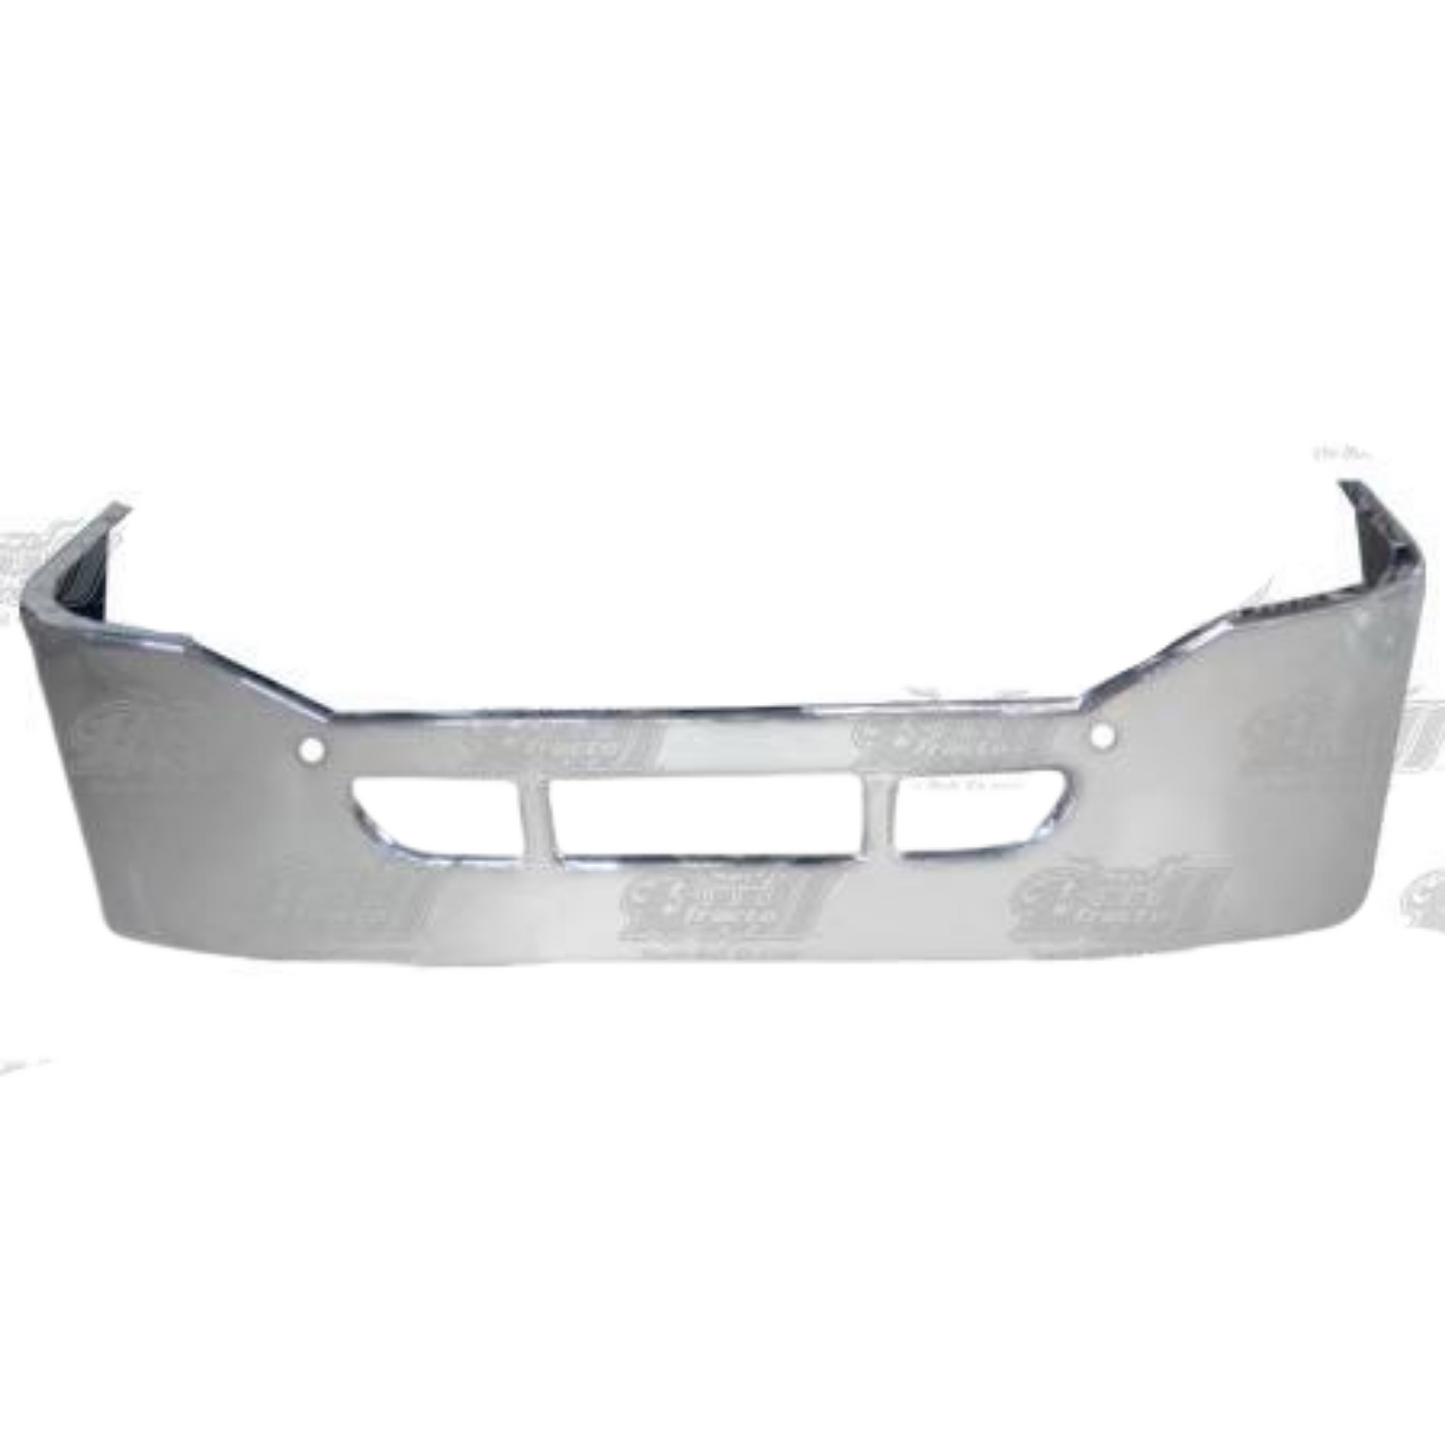 Freightliner Cascadia One Piece Classic Bumper